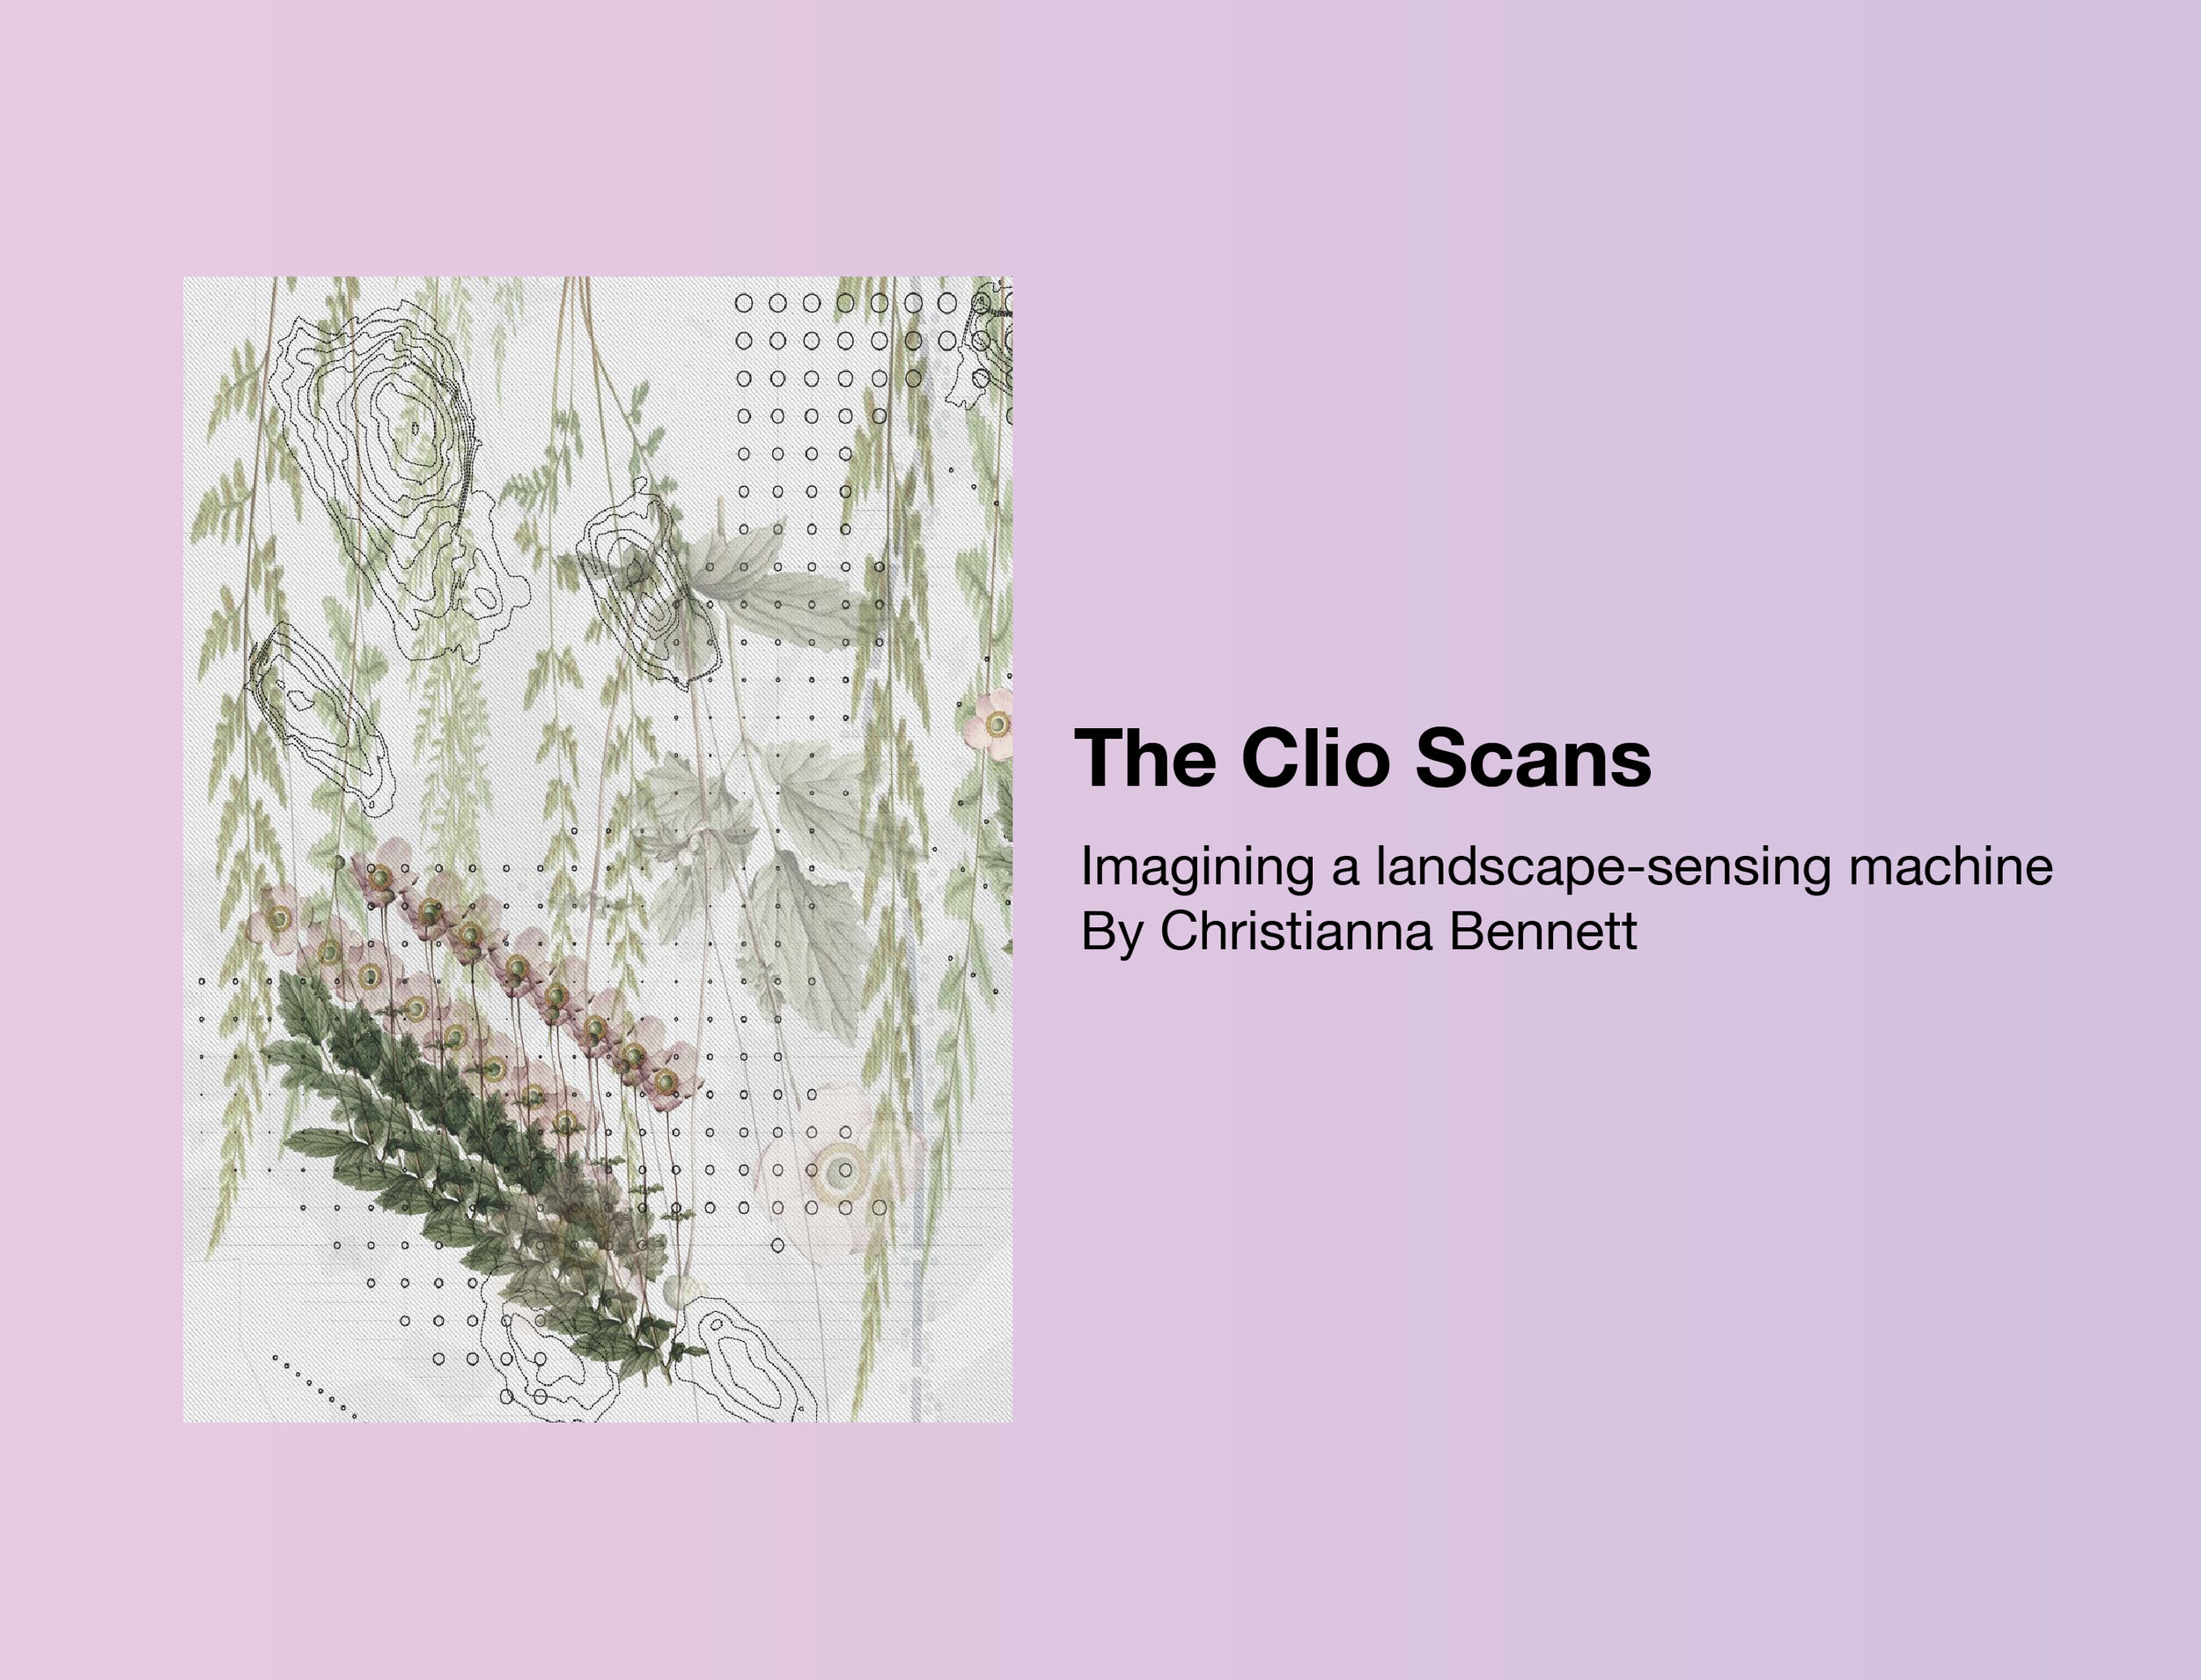 The Clio Scans